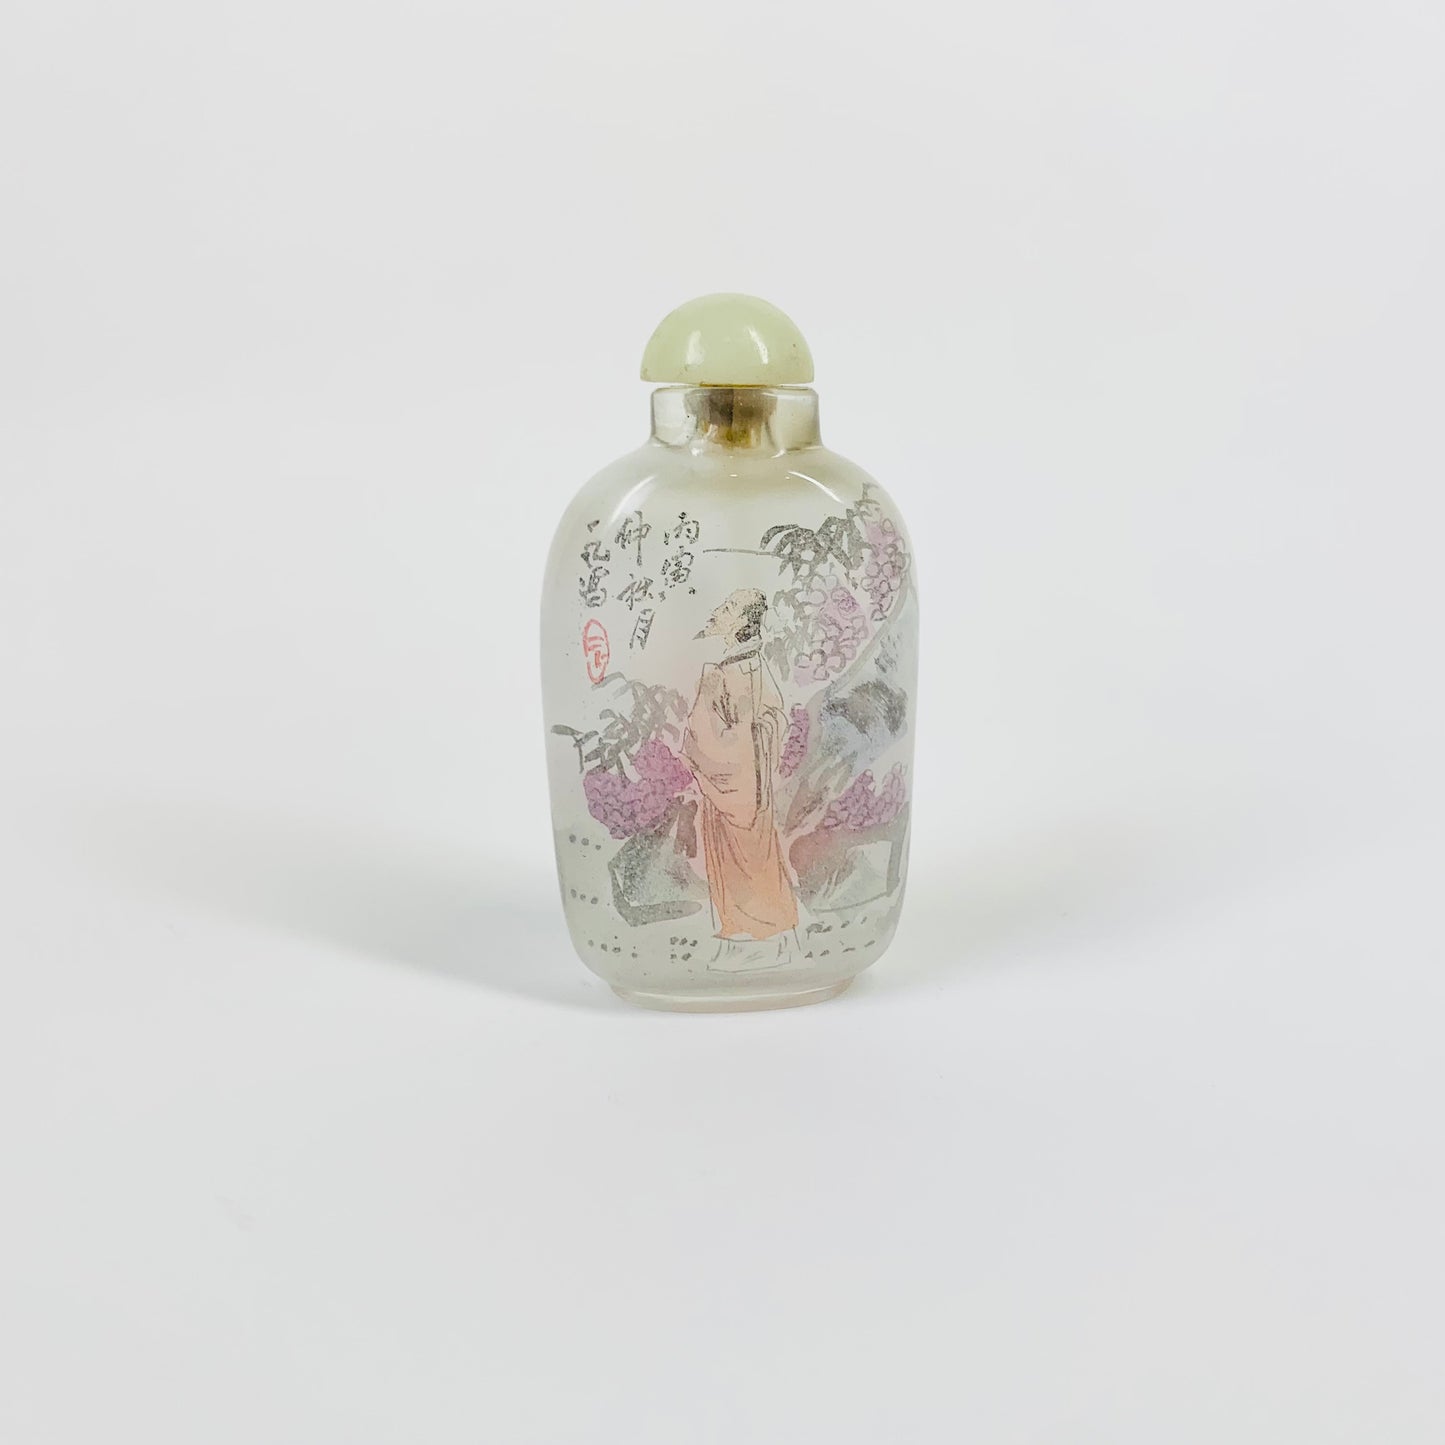 CHINESE SNUFF BOTTLE